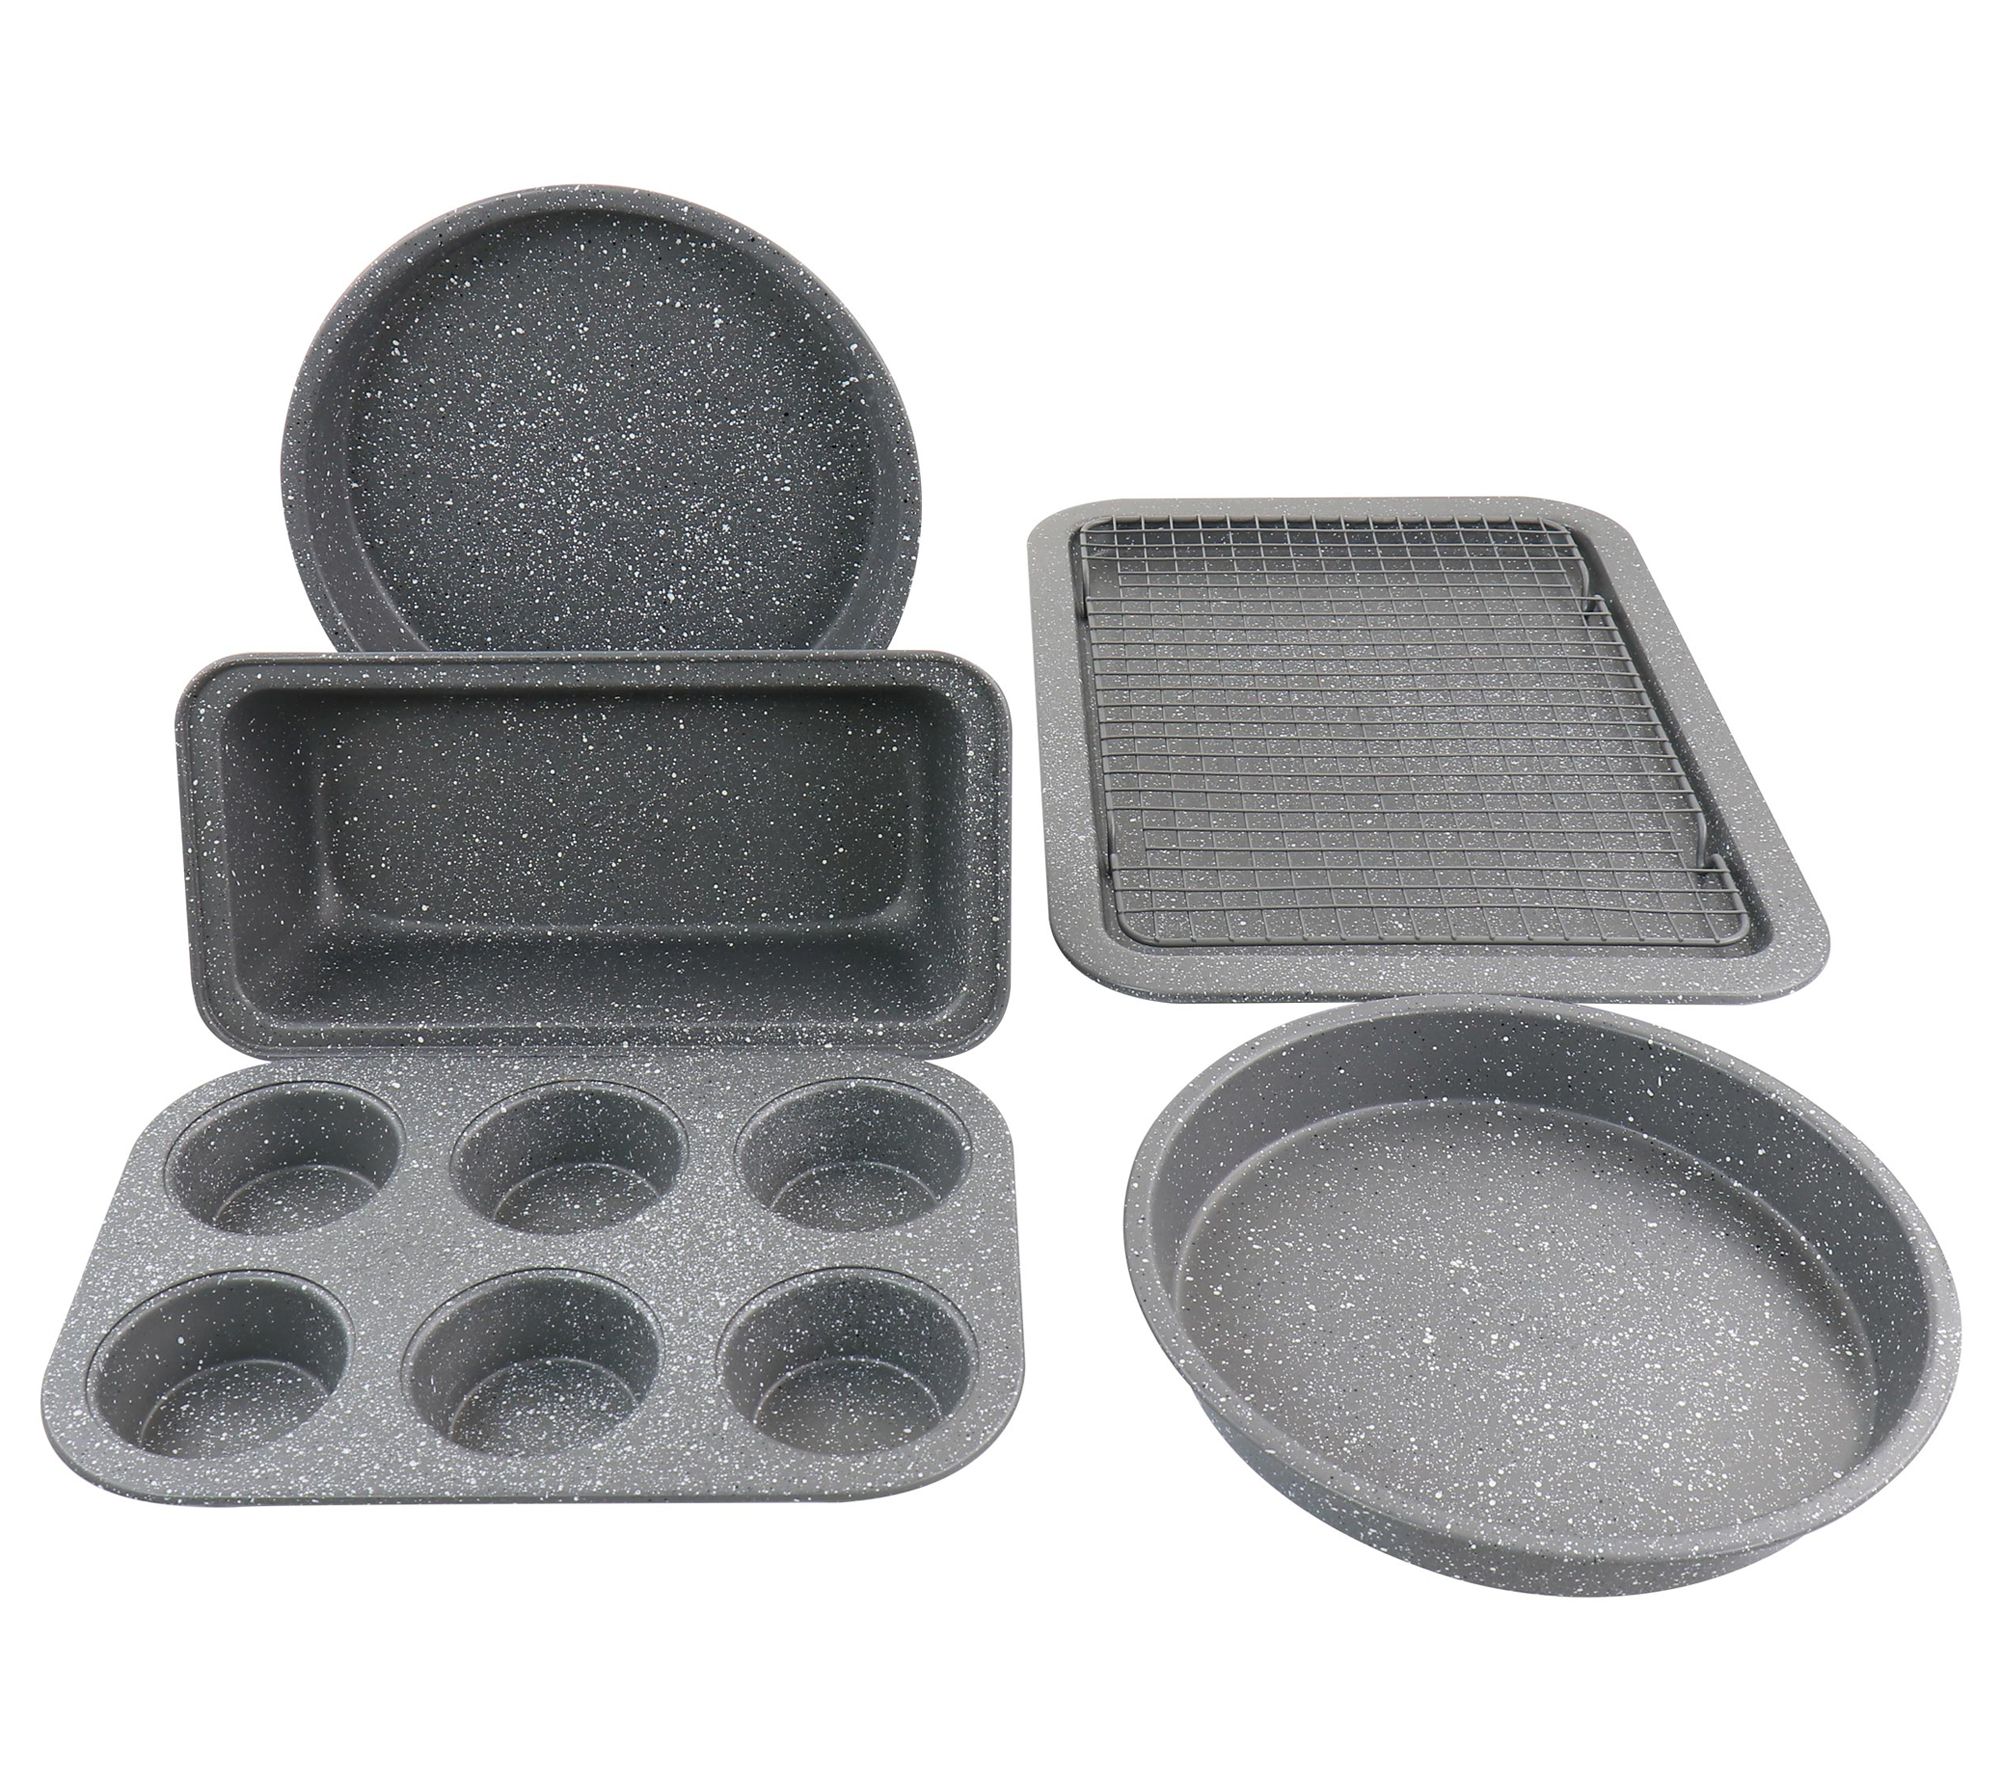 Rachael Ray Yum-o! 2-Piece Steel 9 in. by 13 in. Cake Pan Set, Gray